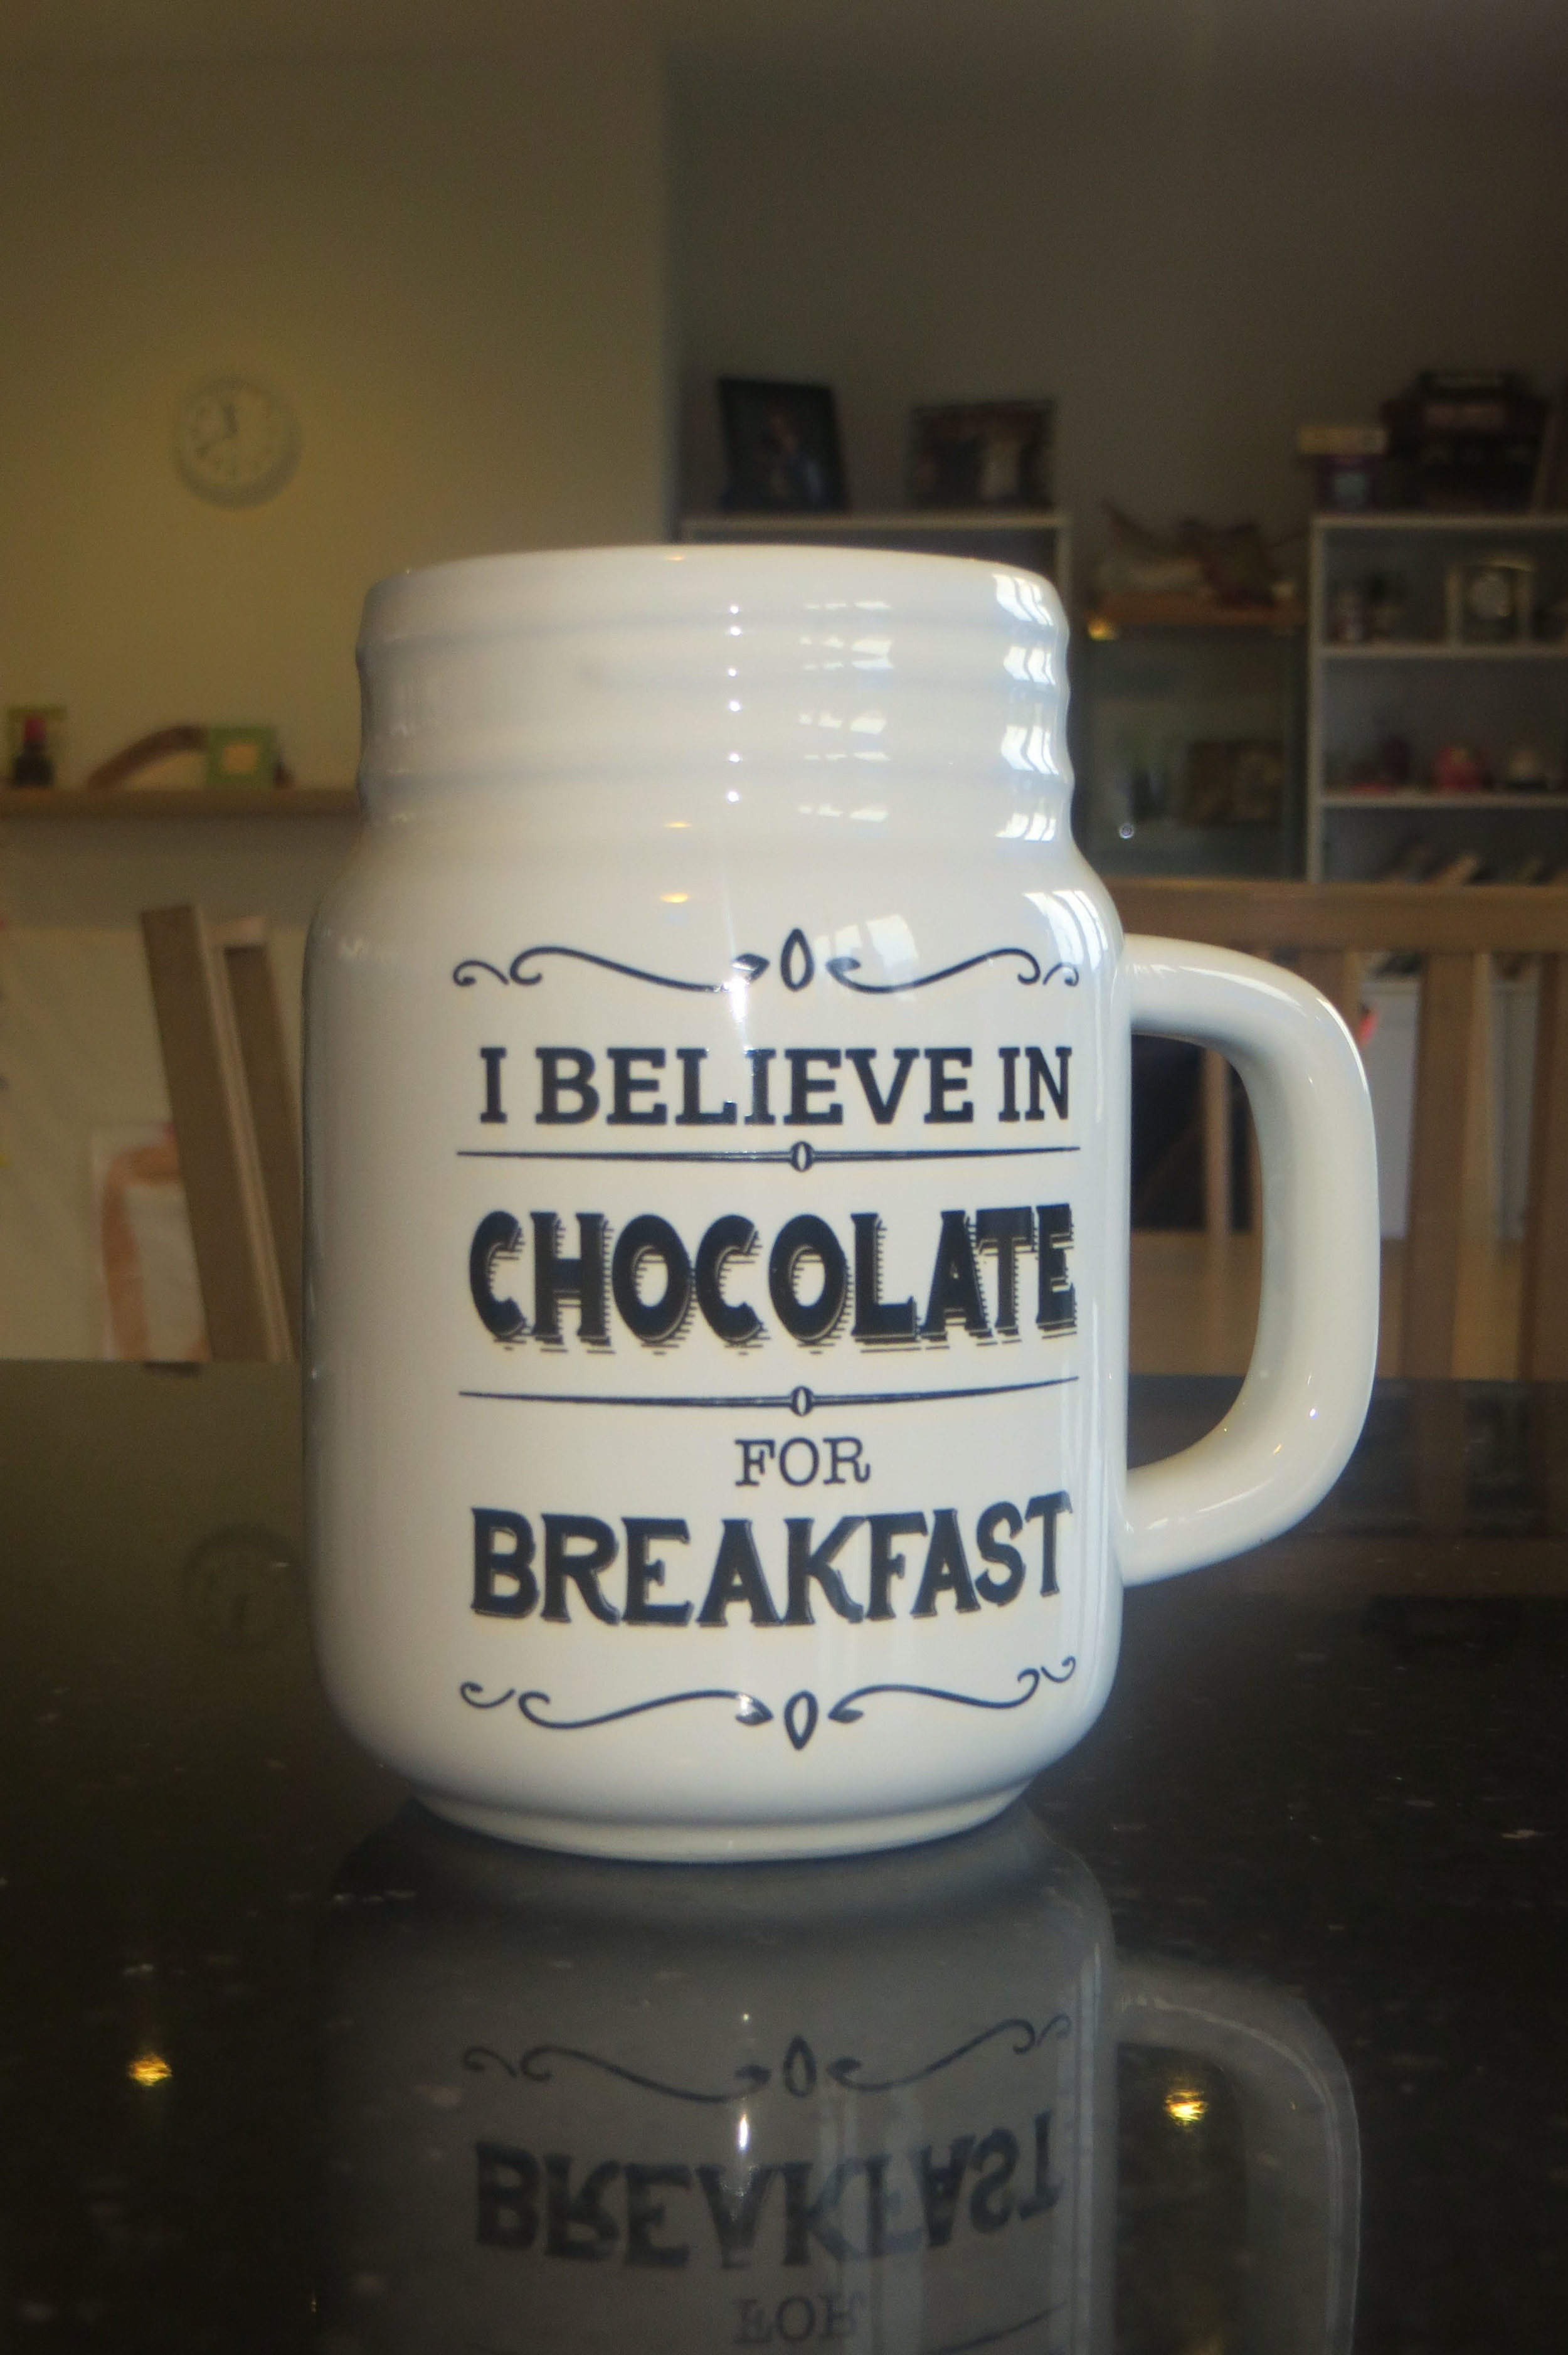 Not my mug! But it's the size required for my morning cuppa.